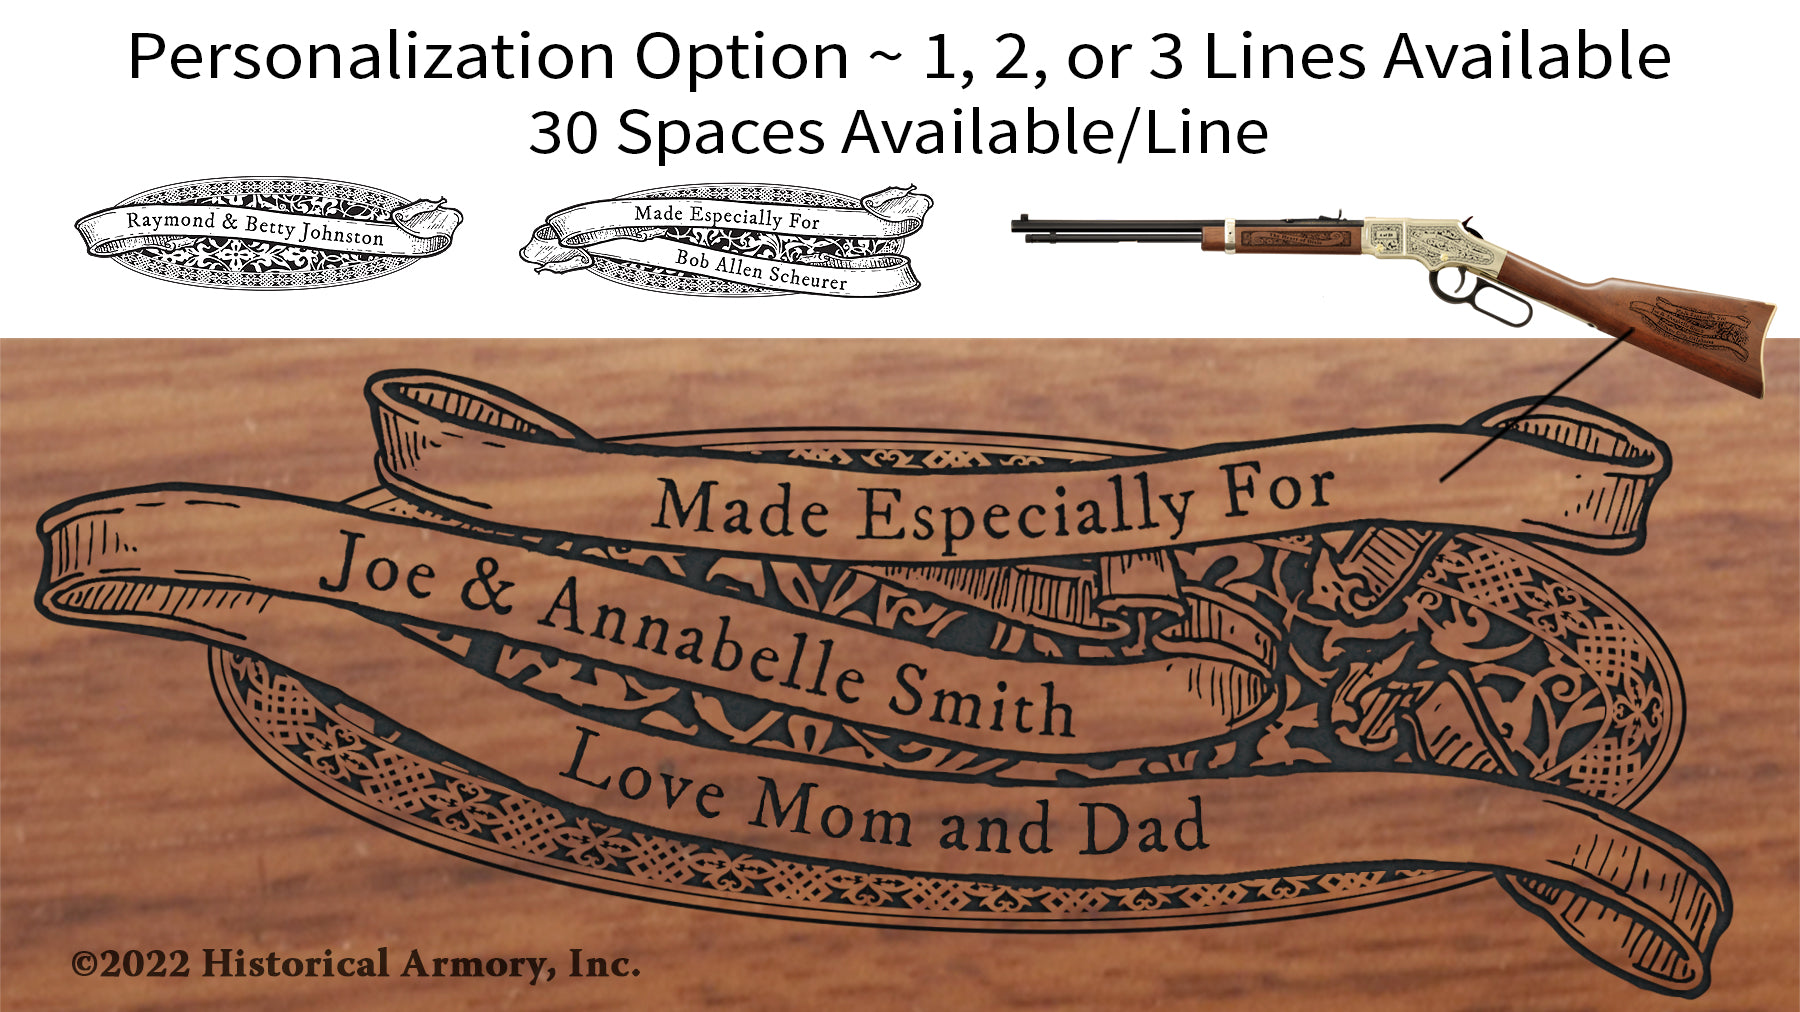 Indiana State Pride Engraved Rifle Personalization